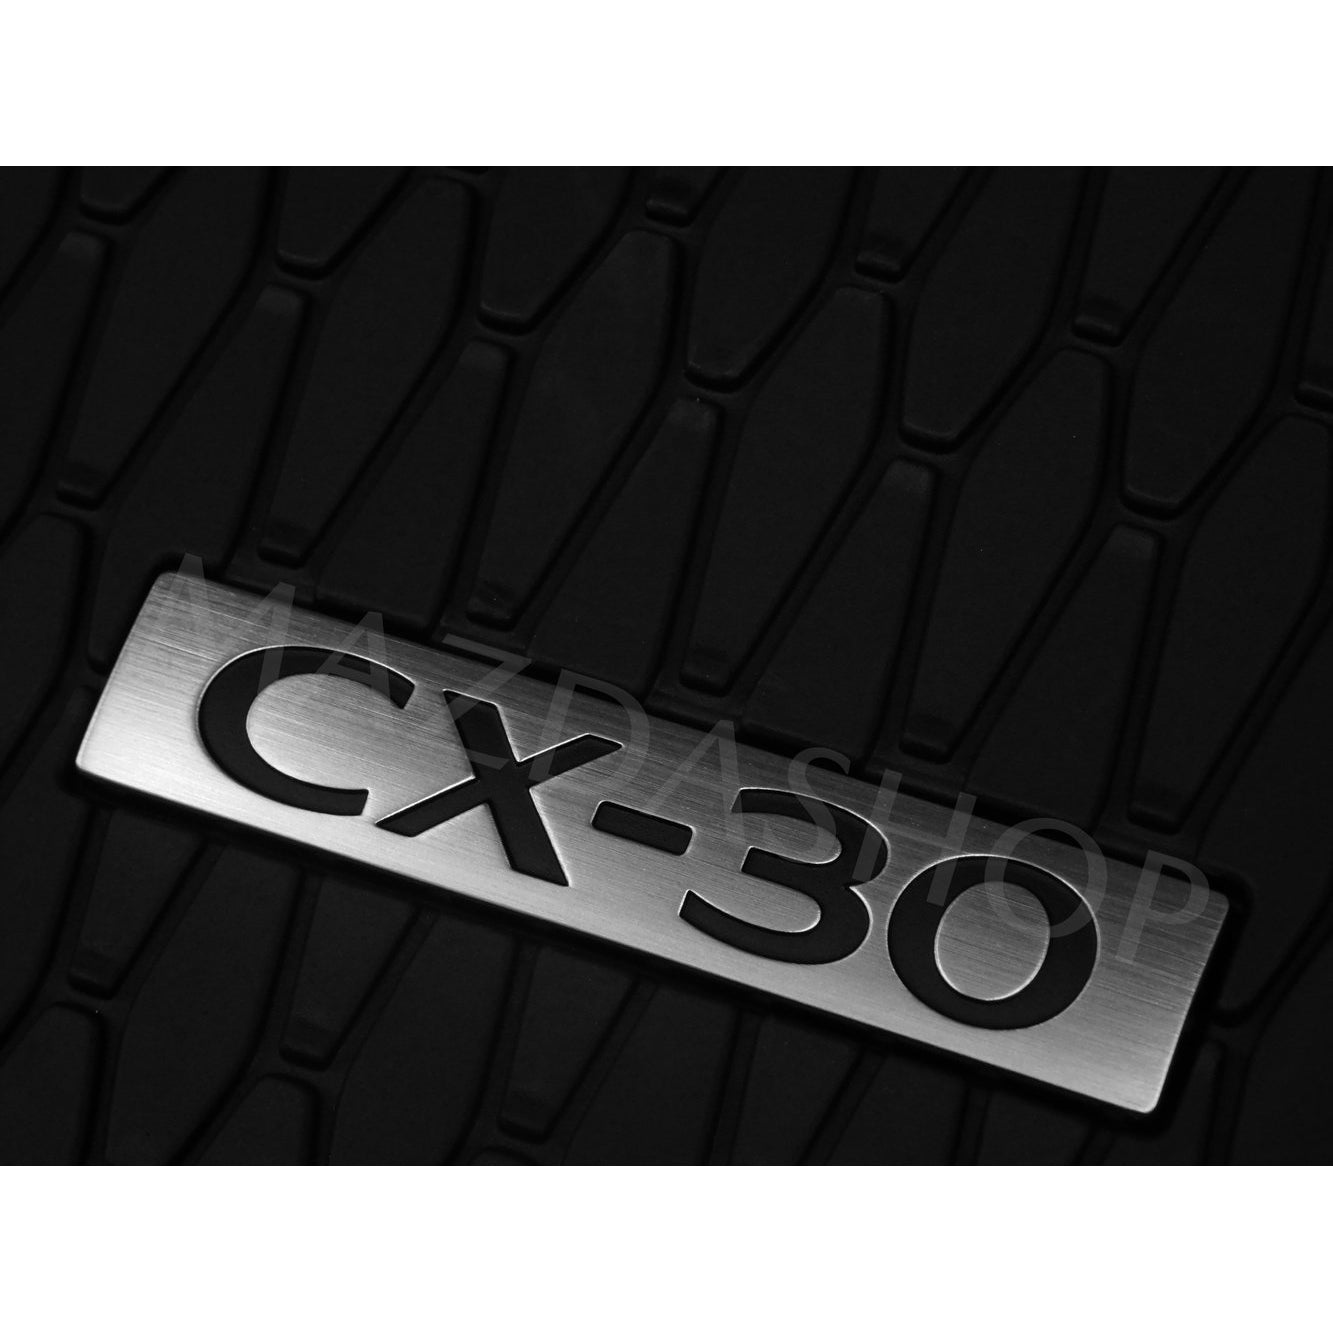 2020-2023 Mazda CX-30 Floor Mats, All-Weather, Low-Wall DGH9-V0